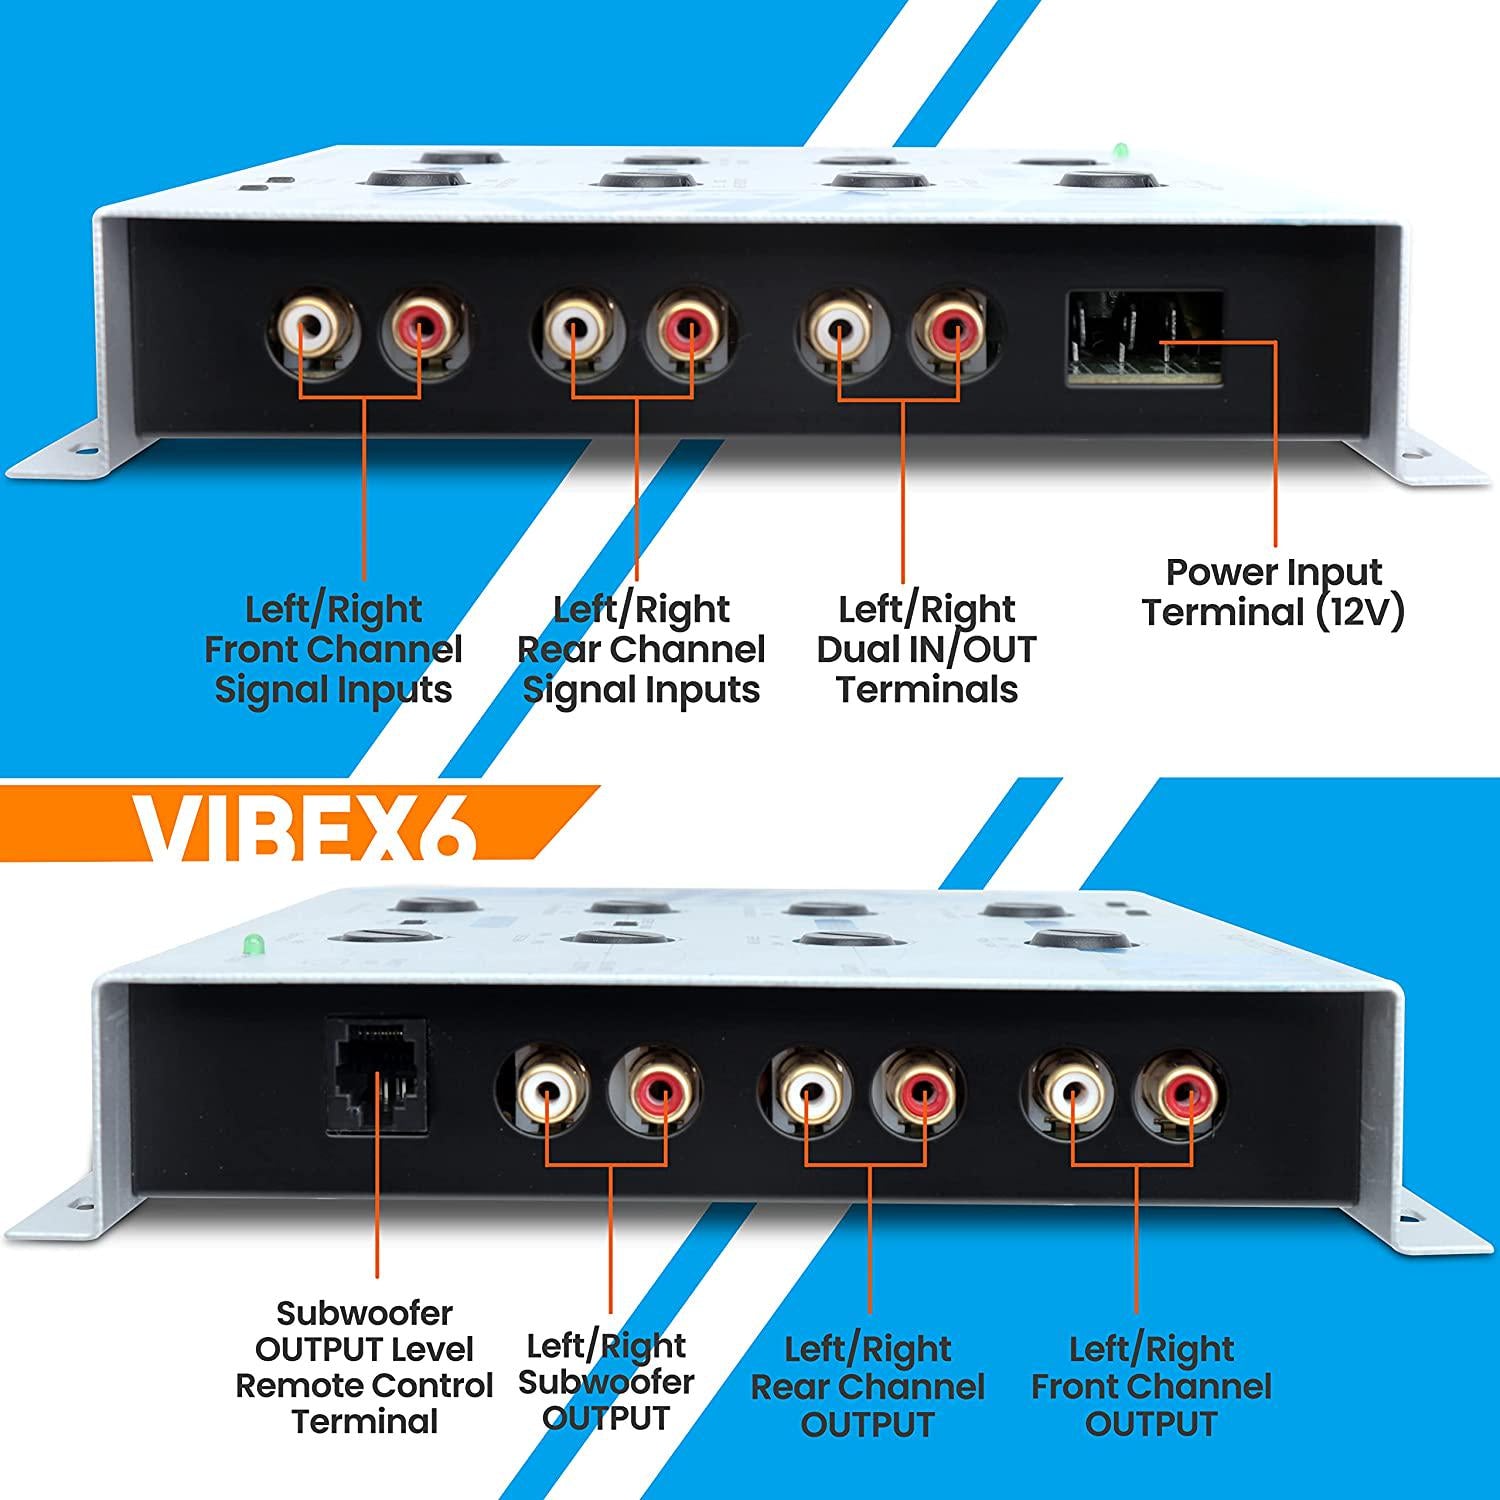 LANZAR, Lanzar VIBEX6 Vibe 3 Way Electronic Crossover Network with Remote Subwoofer Control